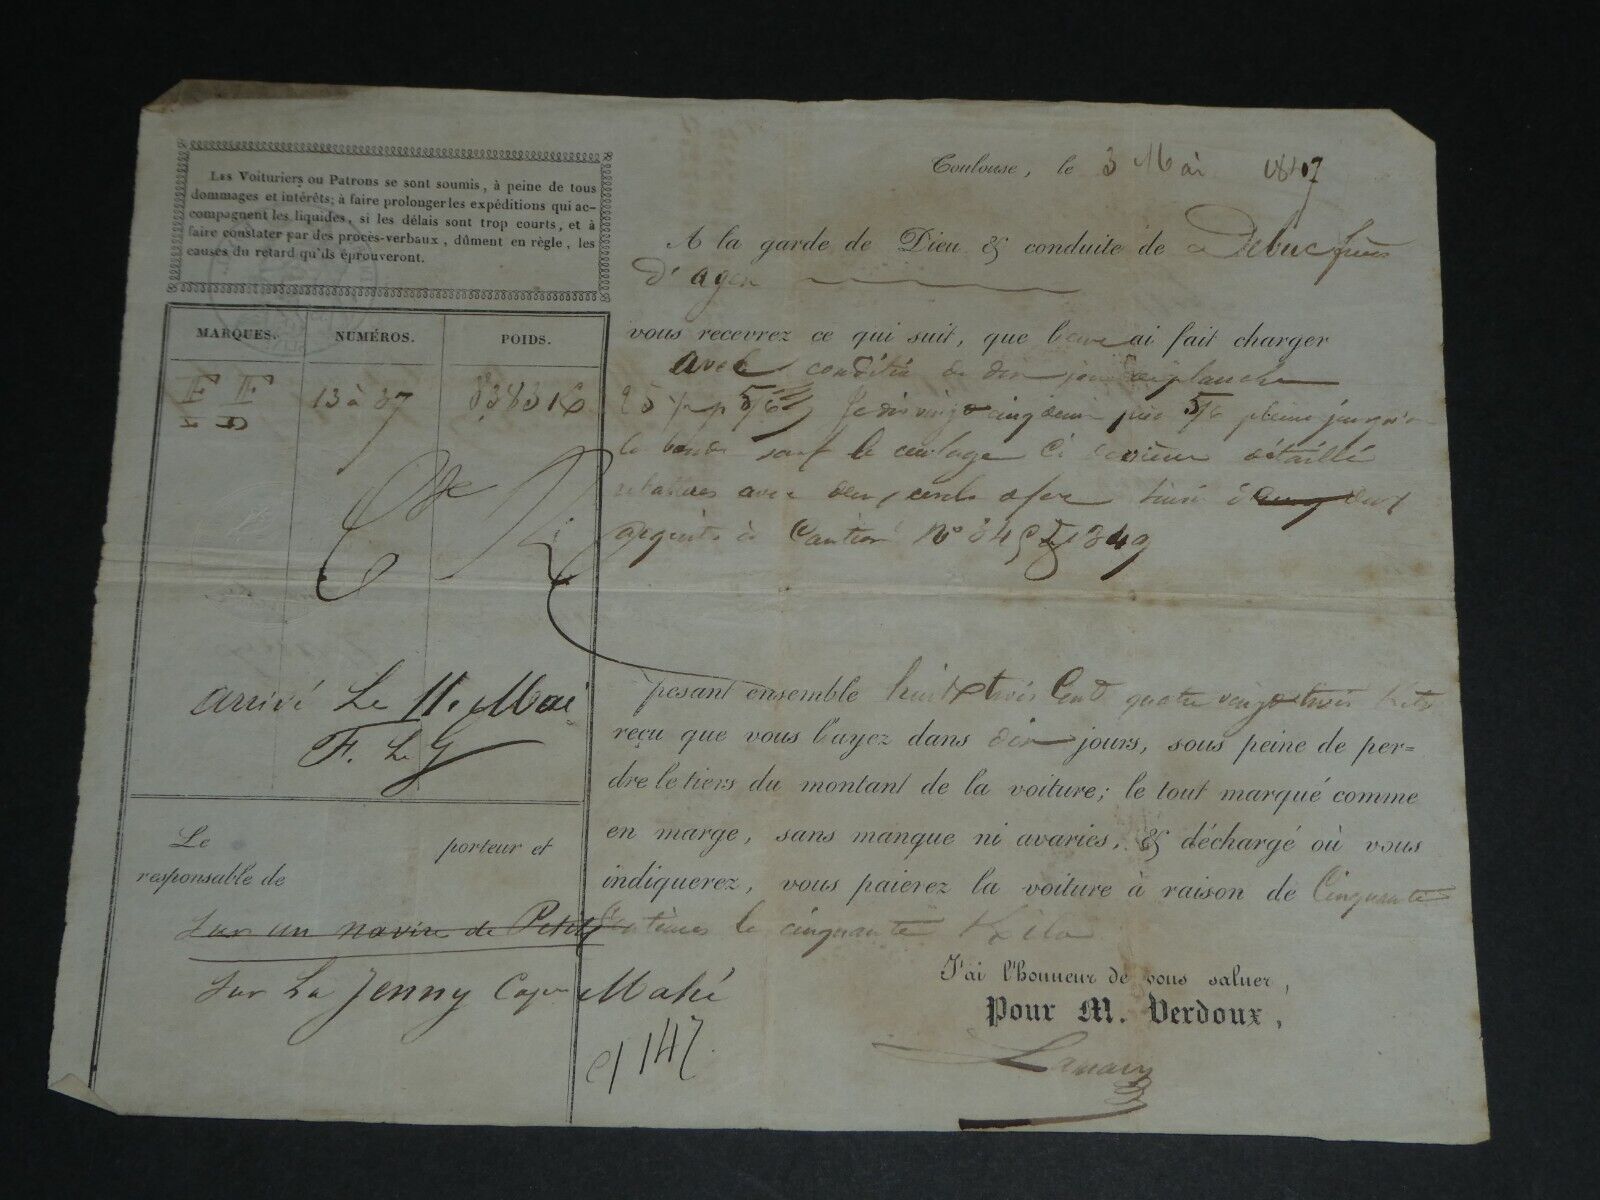 Maritime bill of lading, 1847, Toulouse in Bordeaux